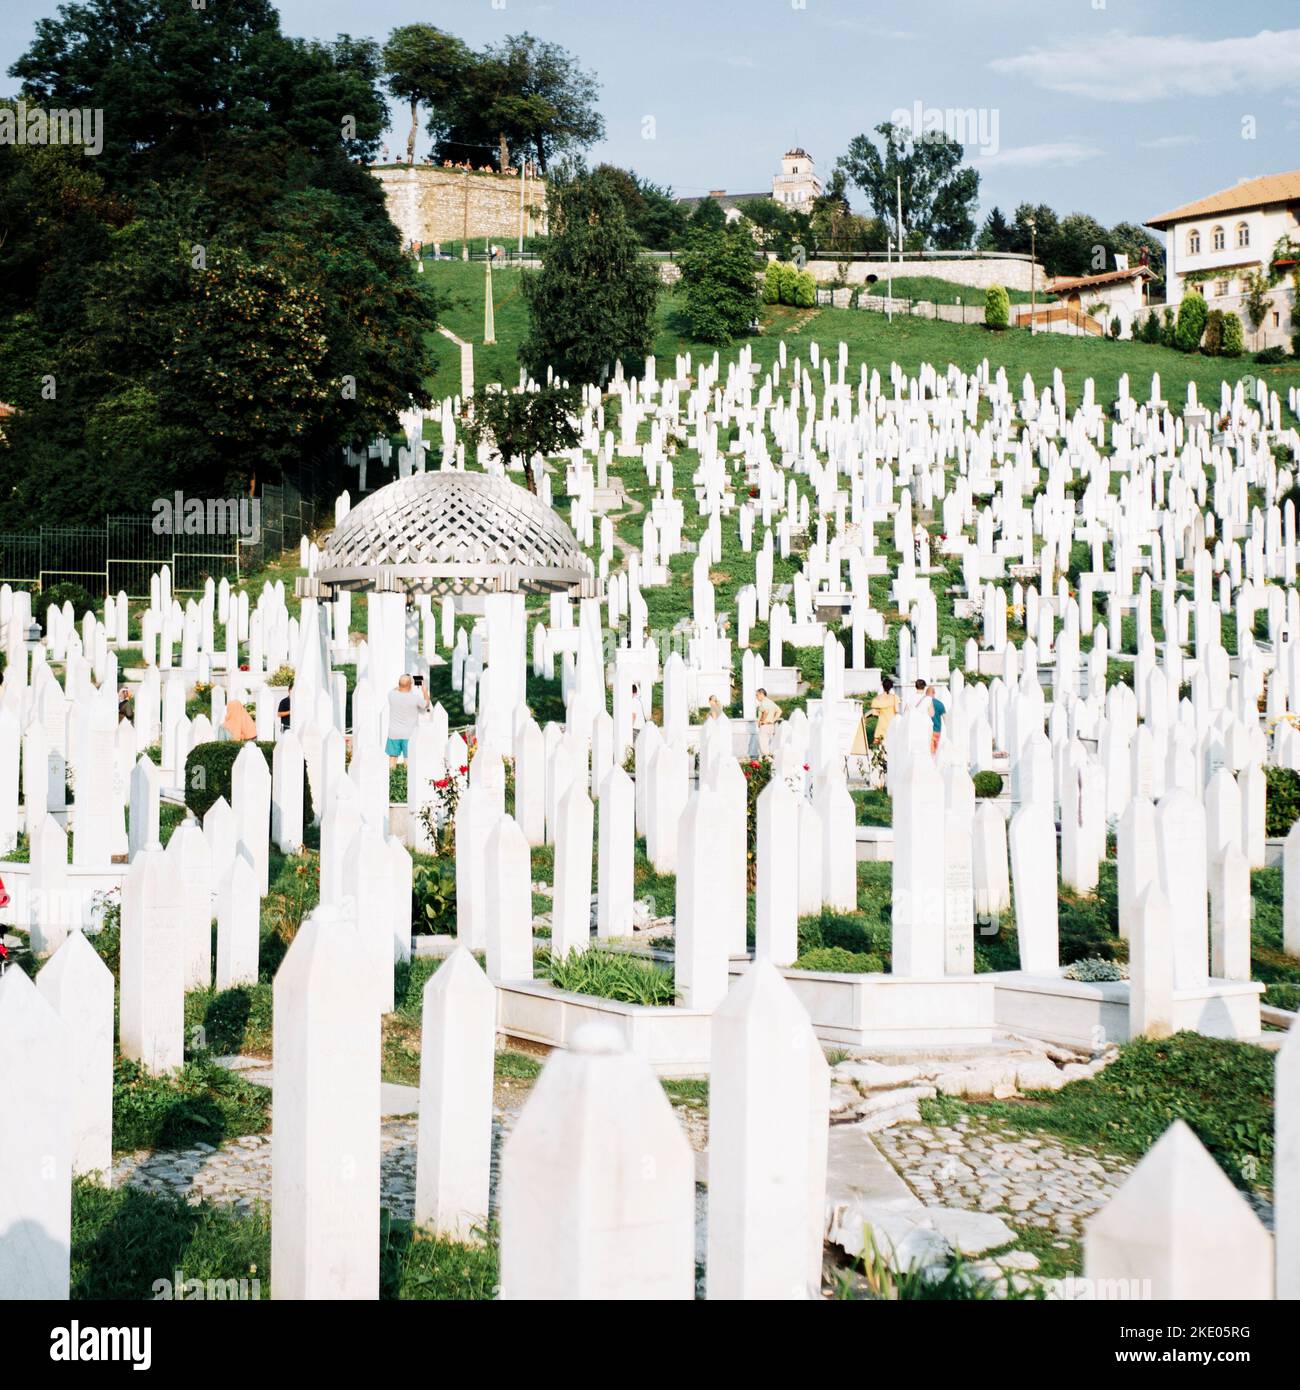 Sarajevo, Bosnia and Herzegovina. August 10, 2018. Some people visit the cemetery of the victims of the siege in the city center Stock Photo